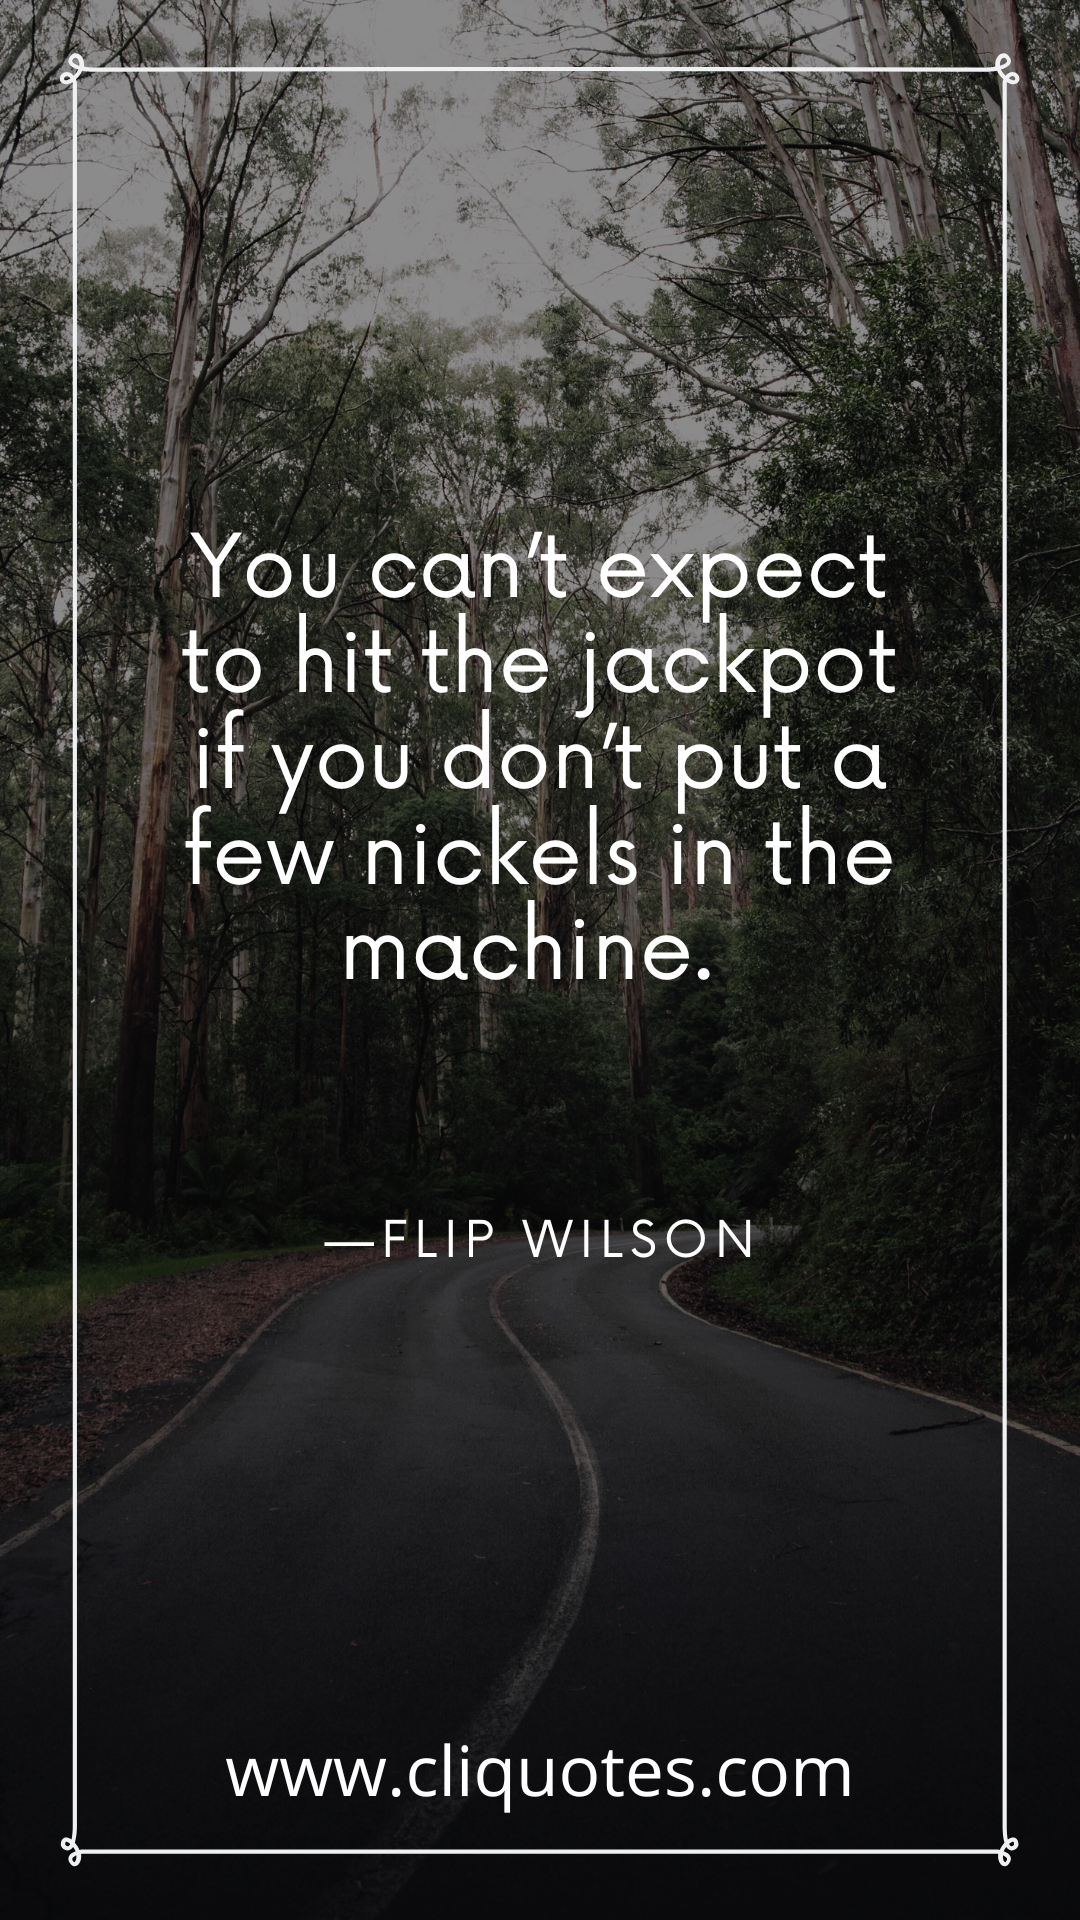 You can’t expect to hit the jackpot if you don’t put a few nickels in the machine. —FLIP WILSON